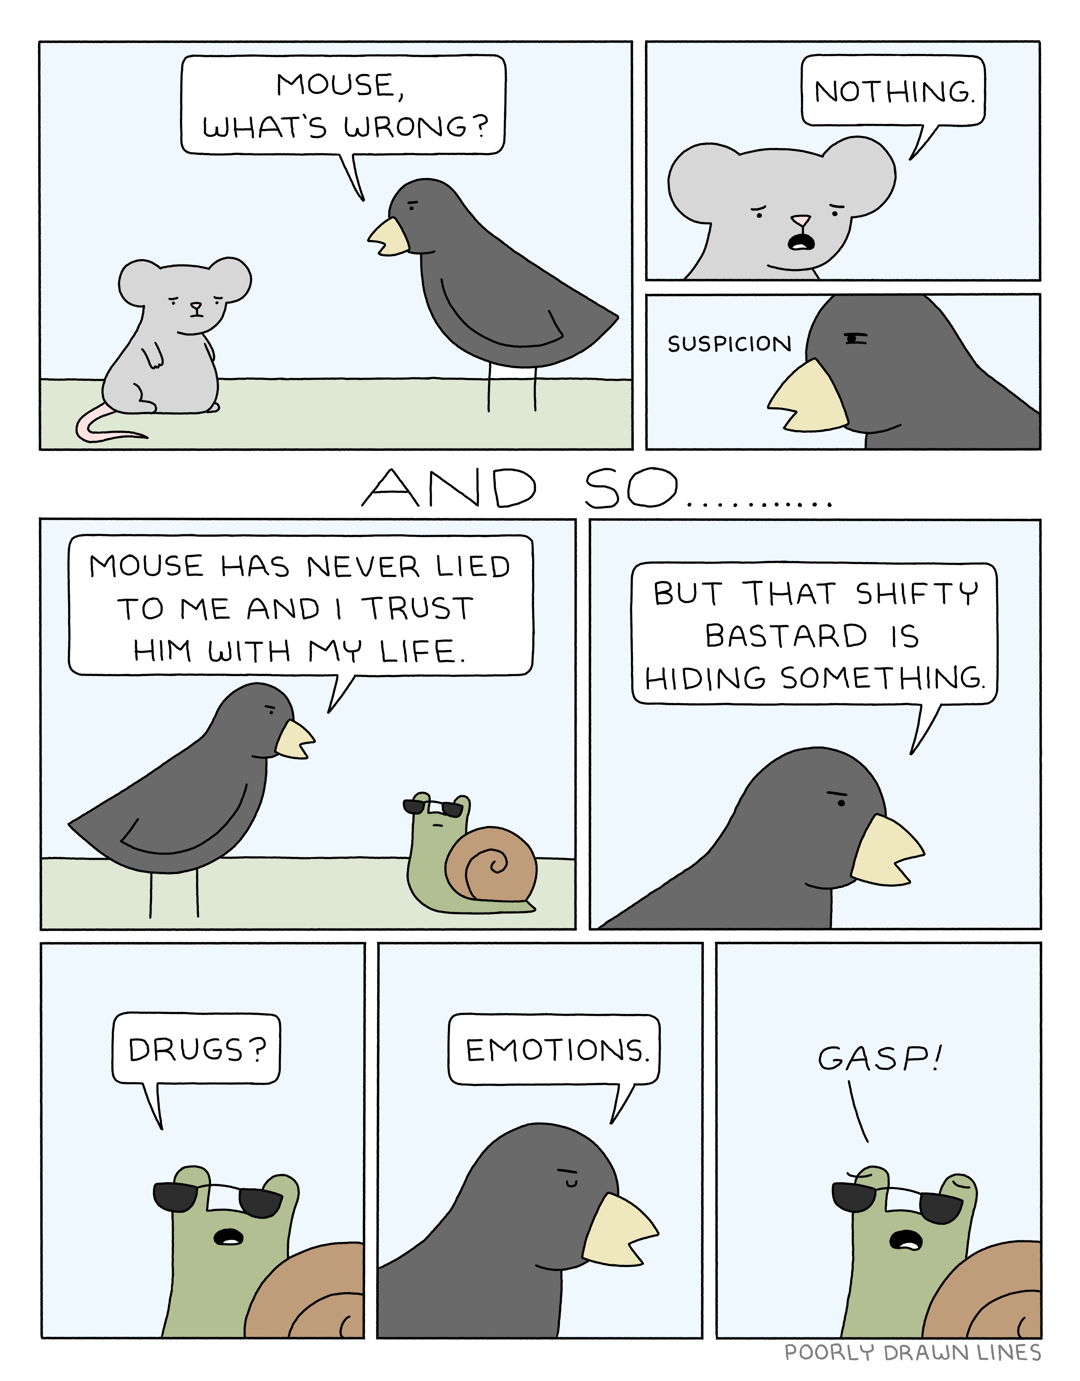 Poorly Drawn Lines – What’s Wrong